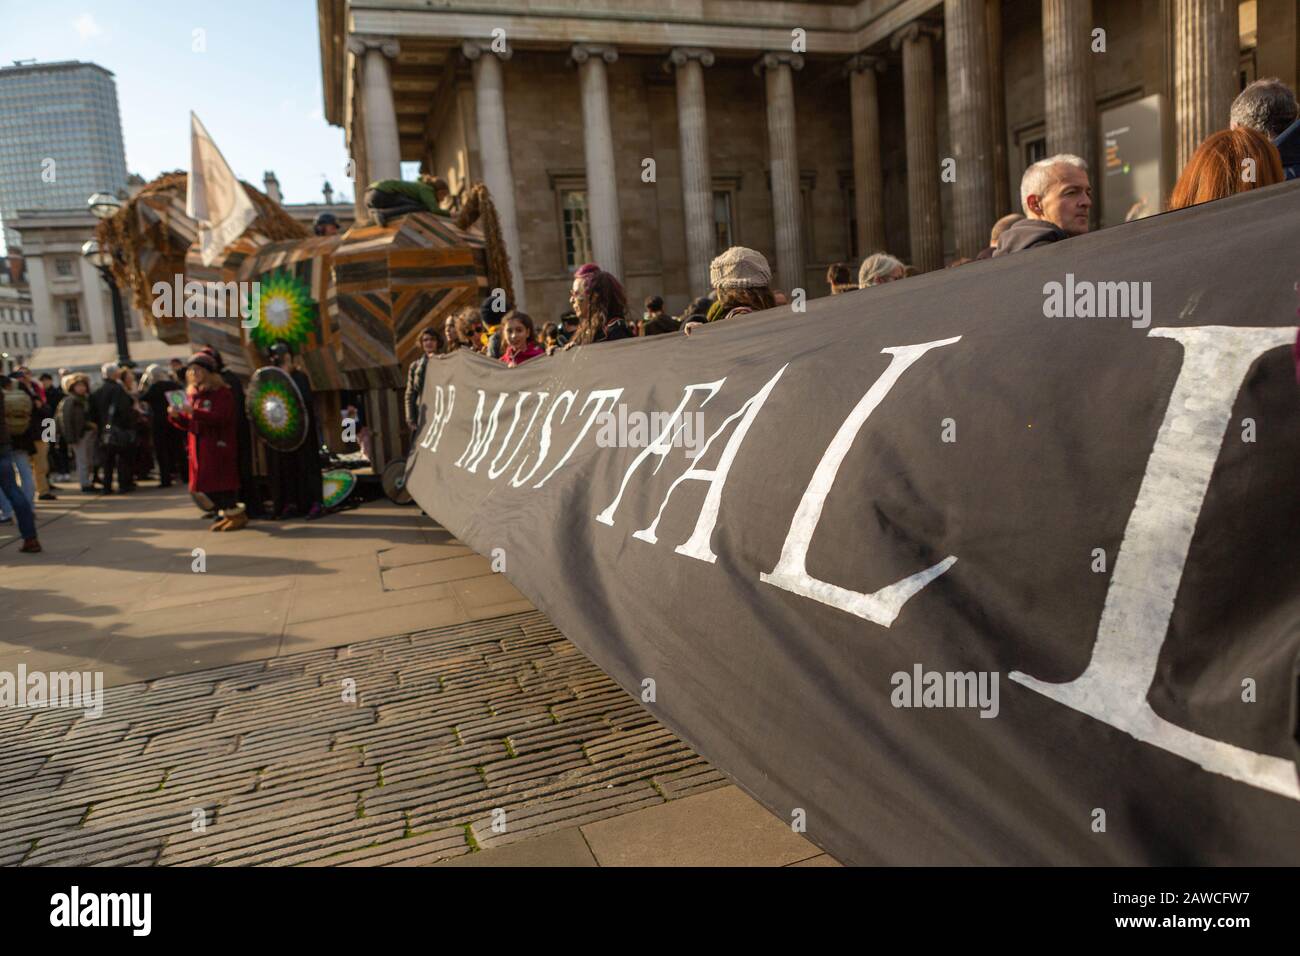 British Museum, London, UK. 8th Feb, 2020. Direct mass action by campaign group BP or not BP, against the museums continued sponsorship by petrochemical giant BP despite the growing climate crisis. Penelope Barritt/Alamy Live News Stock Photo